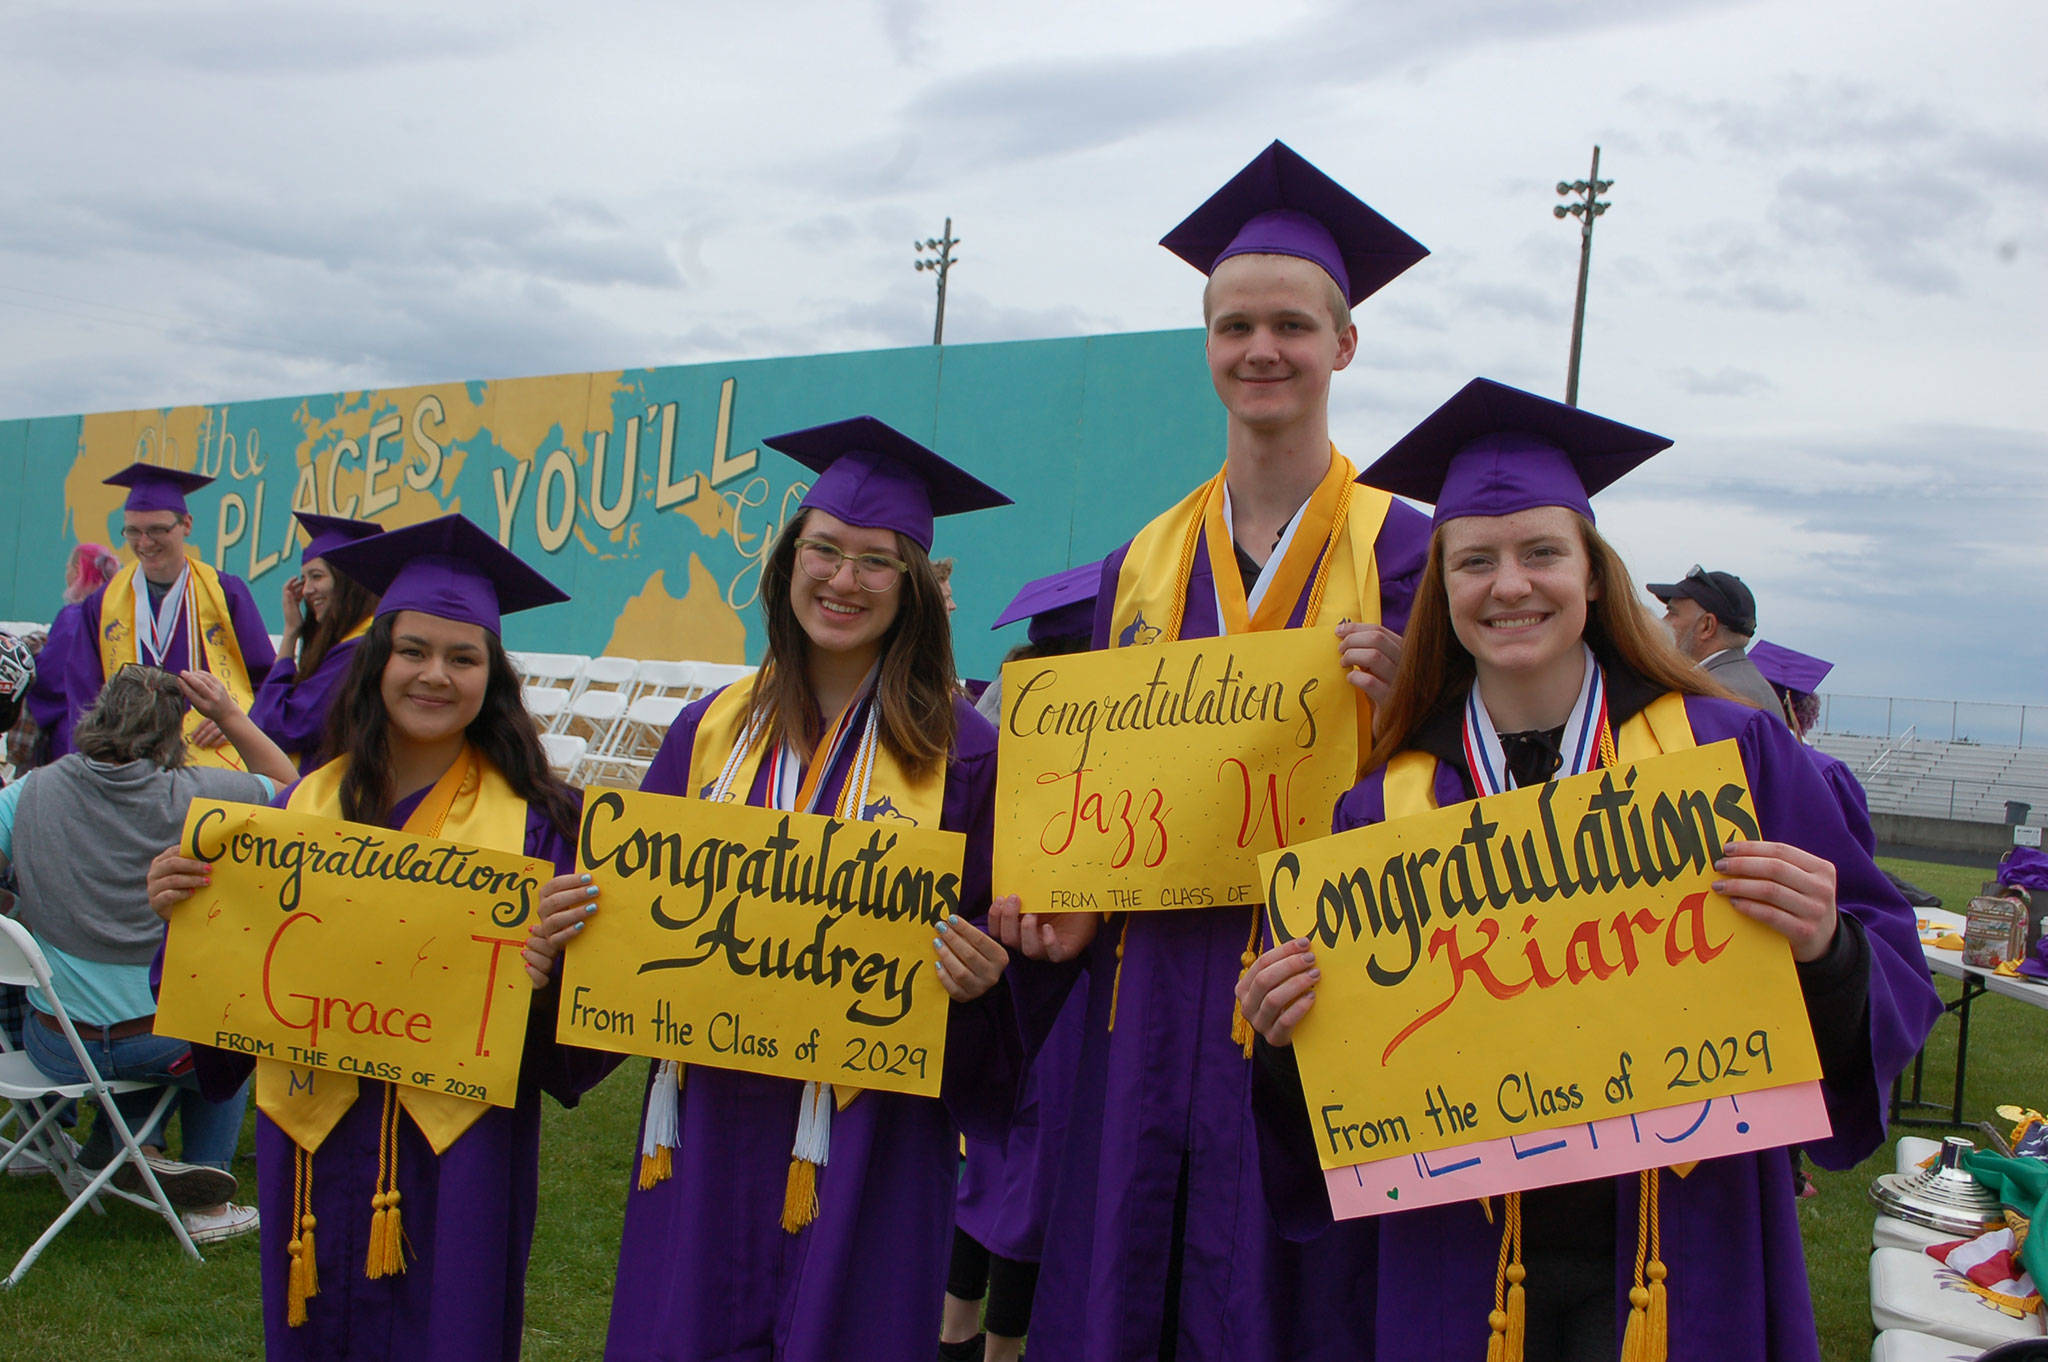 Sequim High School’s class of 2018 four valedictorians, Grace Tolberd, left, Audrey Hughes, Jazz Weller and Kiara Pierson, stand together at the track during graduation rehearsal on June 8. Sequim Gazette photo by Erin Hawkins